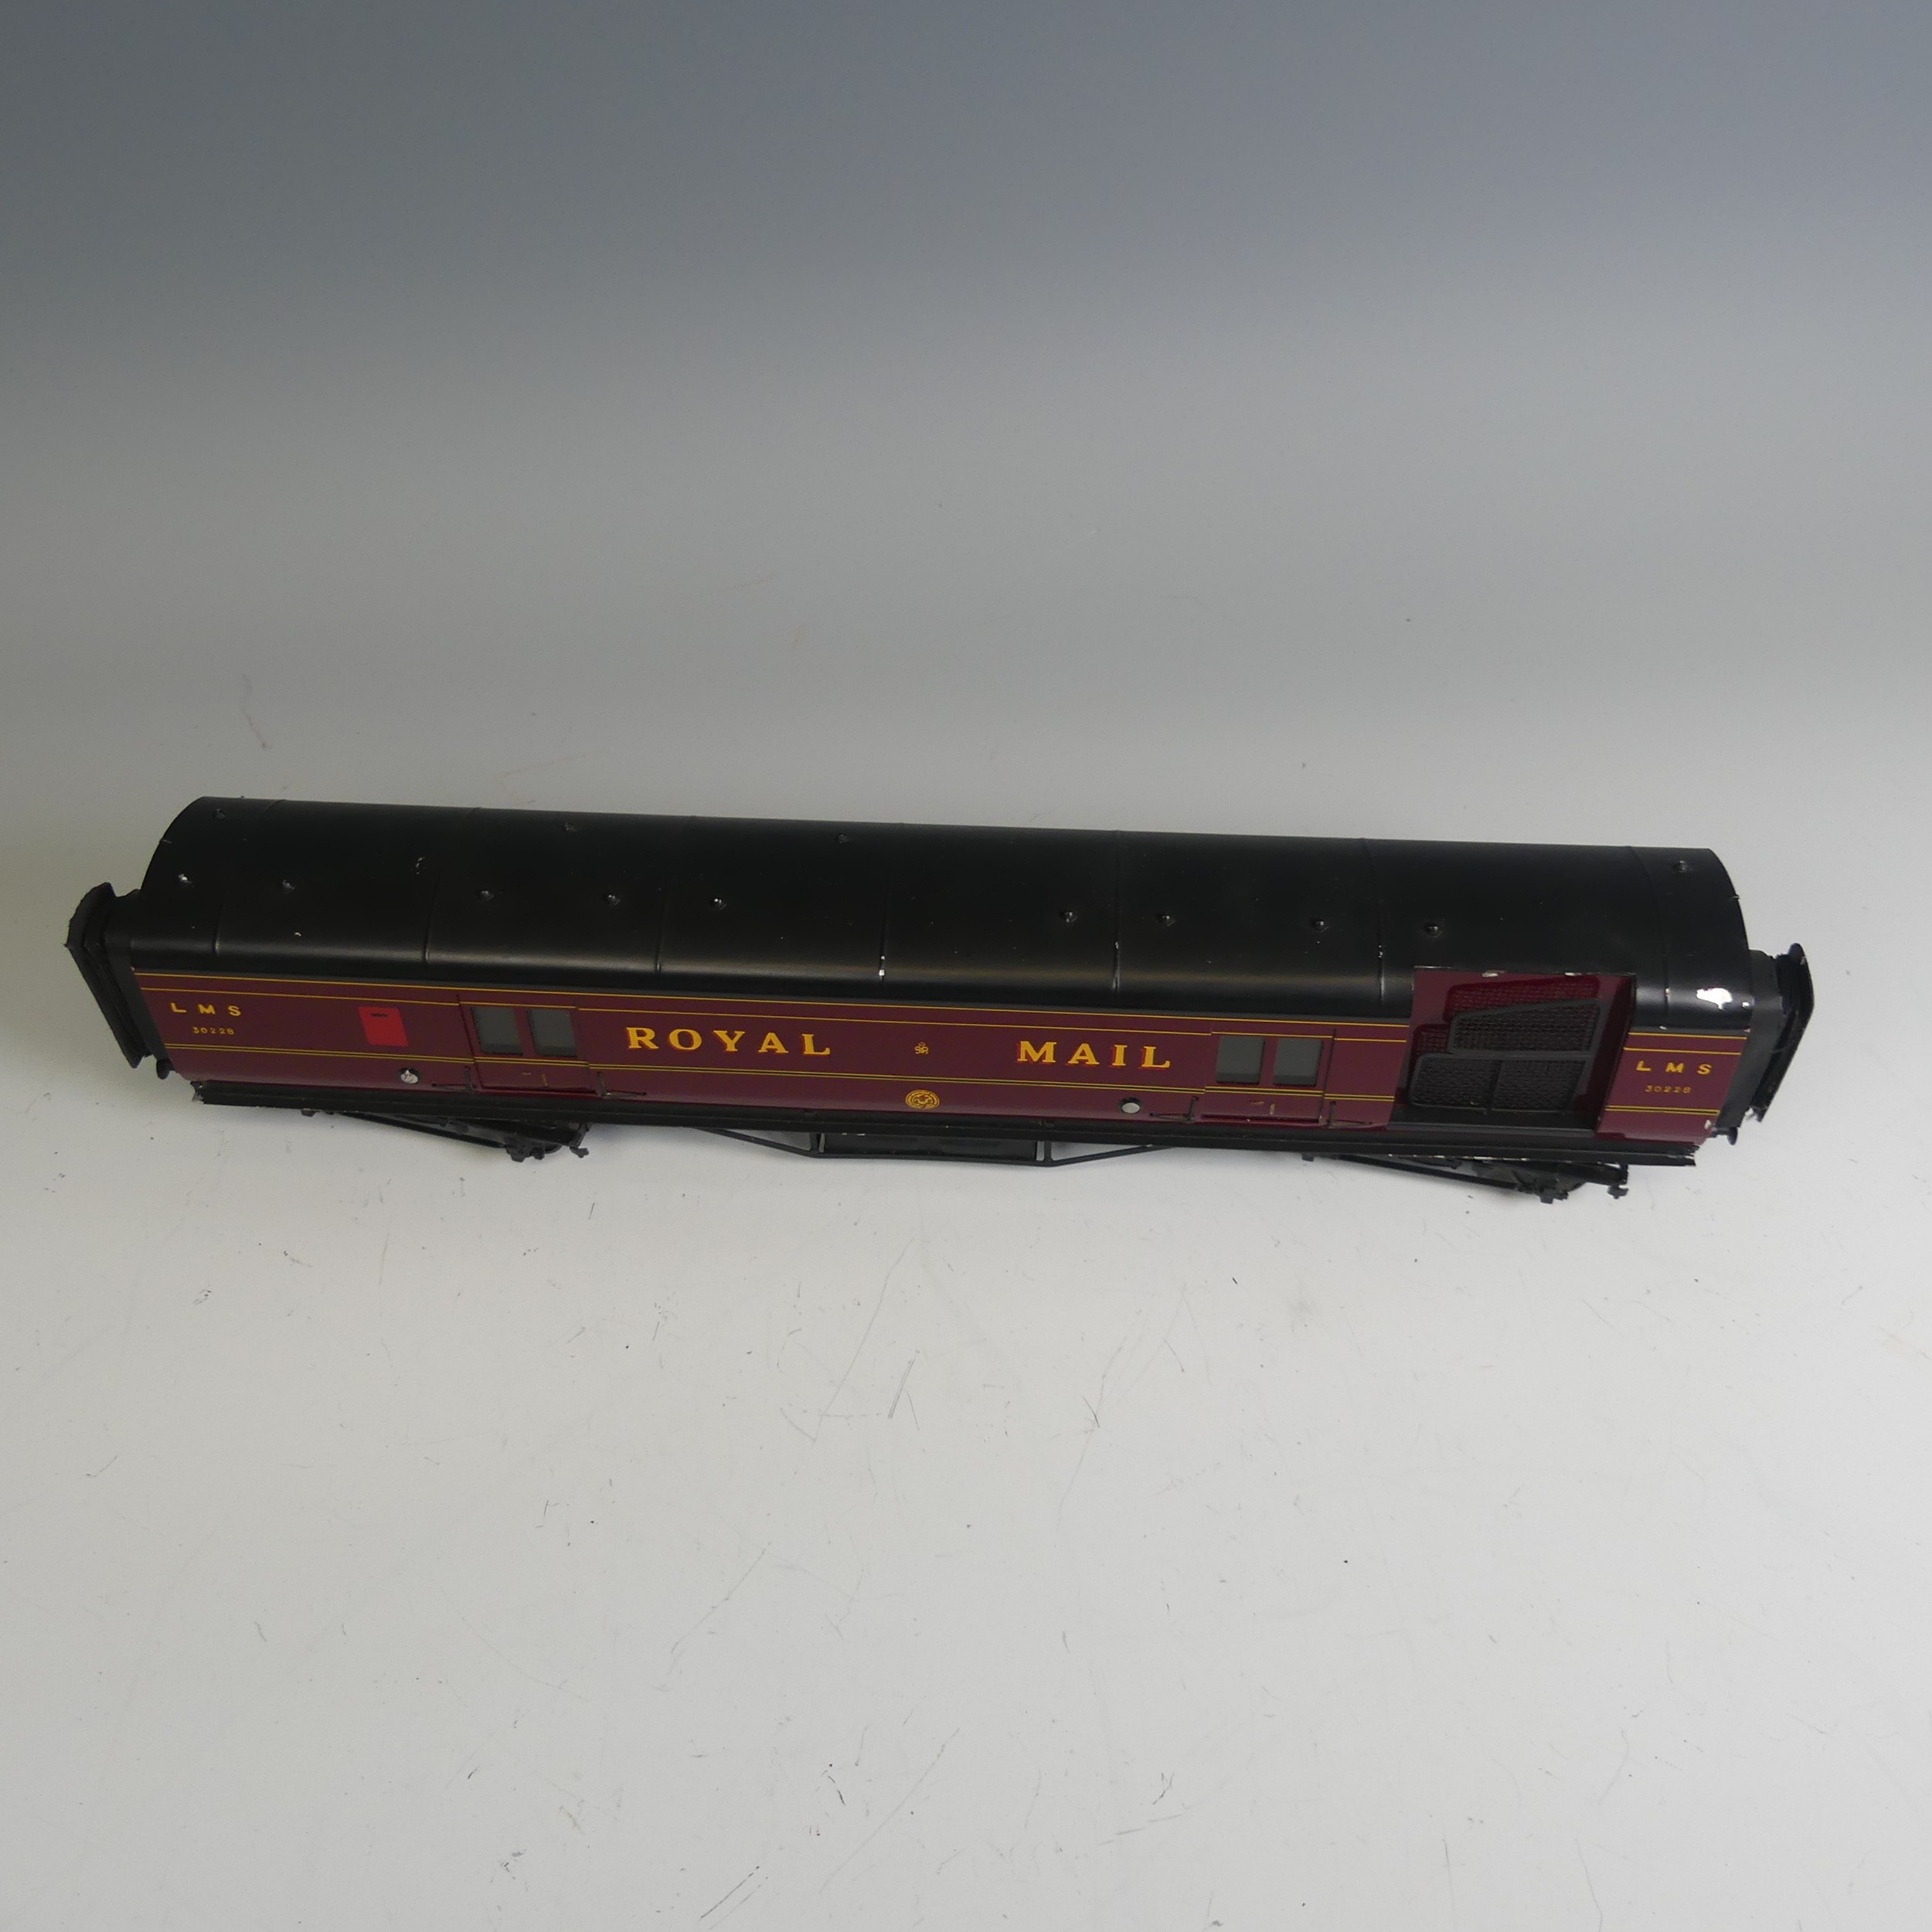 Exley ‘0’ gauge LMS Royal Mail Coach, in LMS maroon with yellow lettering, No. 30228. - Image 3 of 5